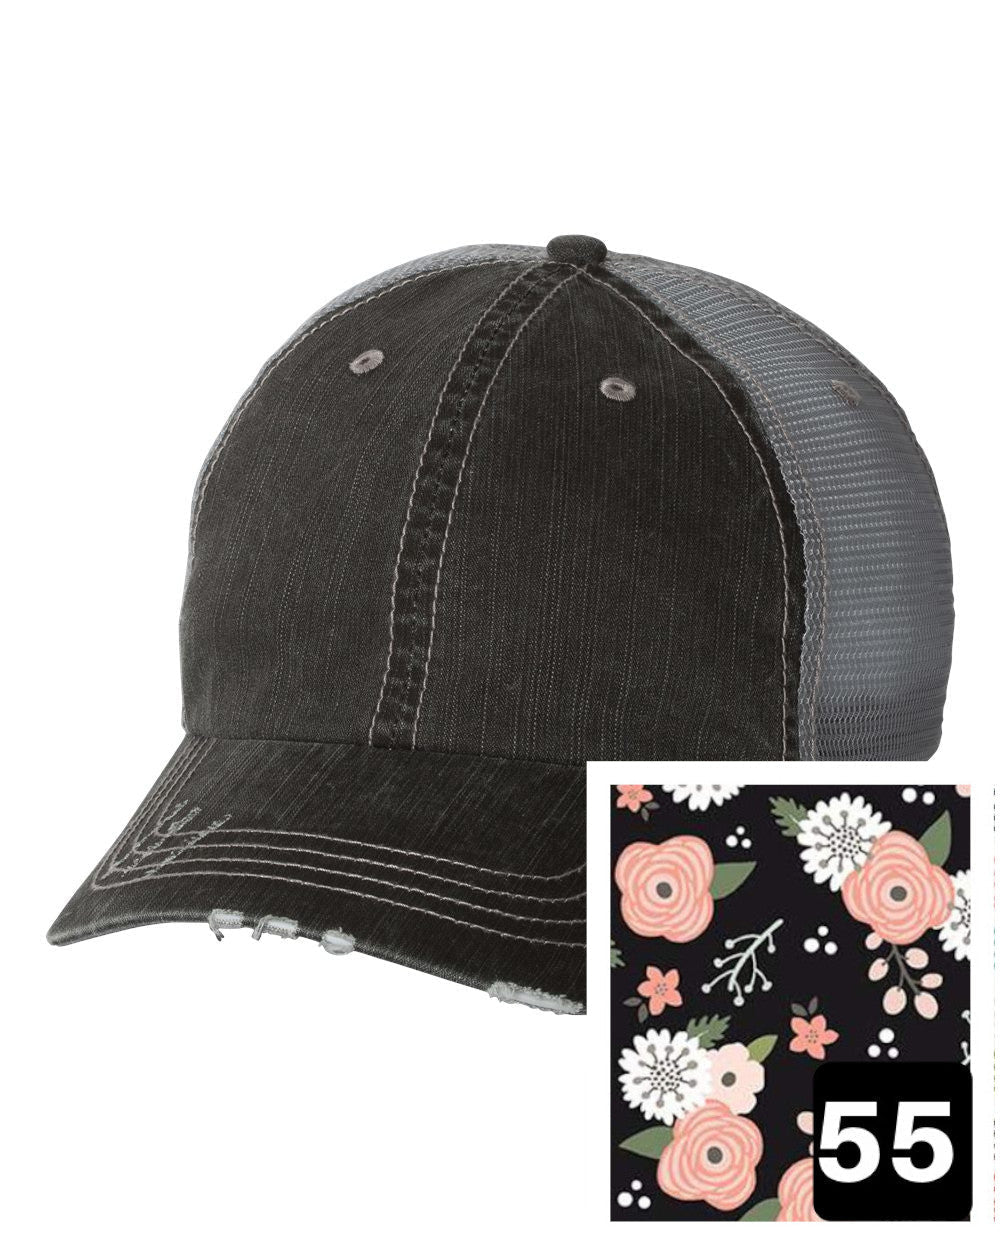 gray distressed trucker hat with petite floral on navy fabric state of Virginia